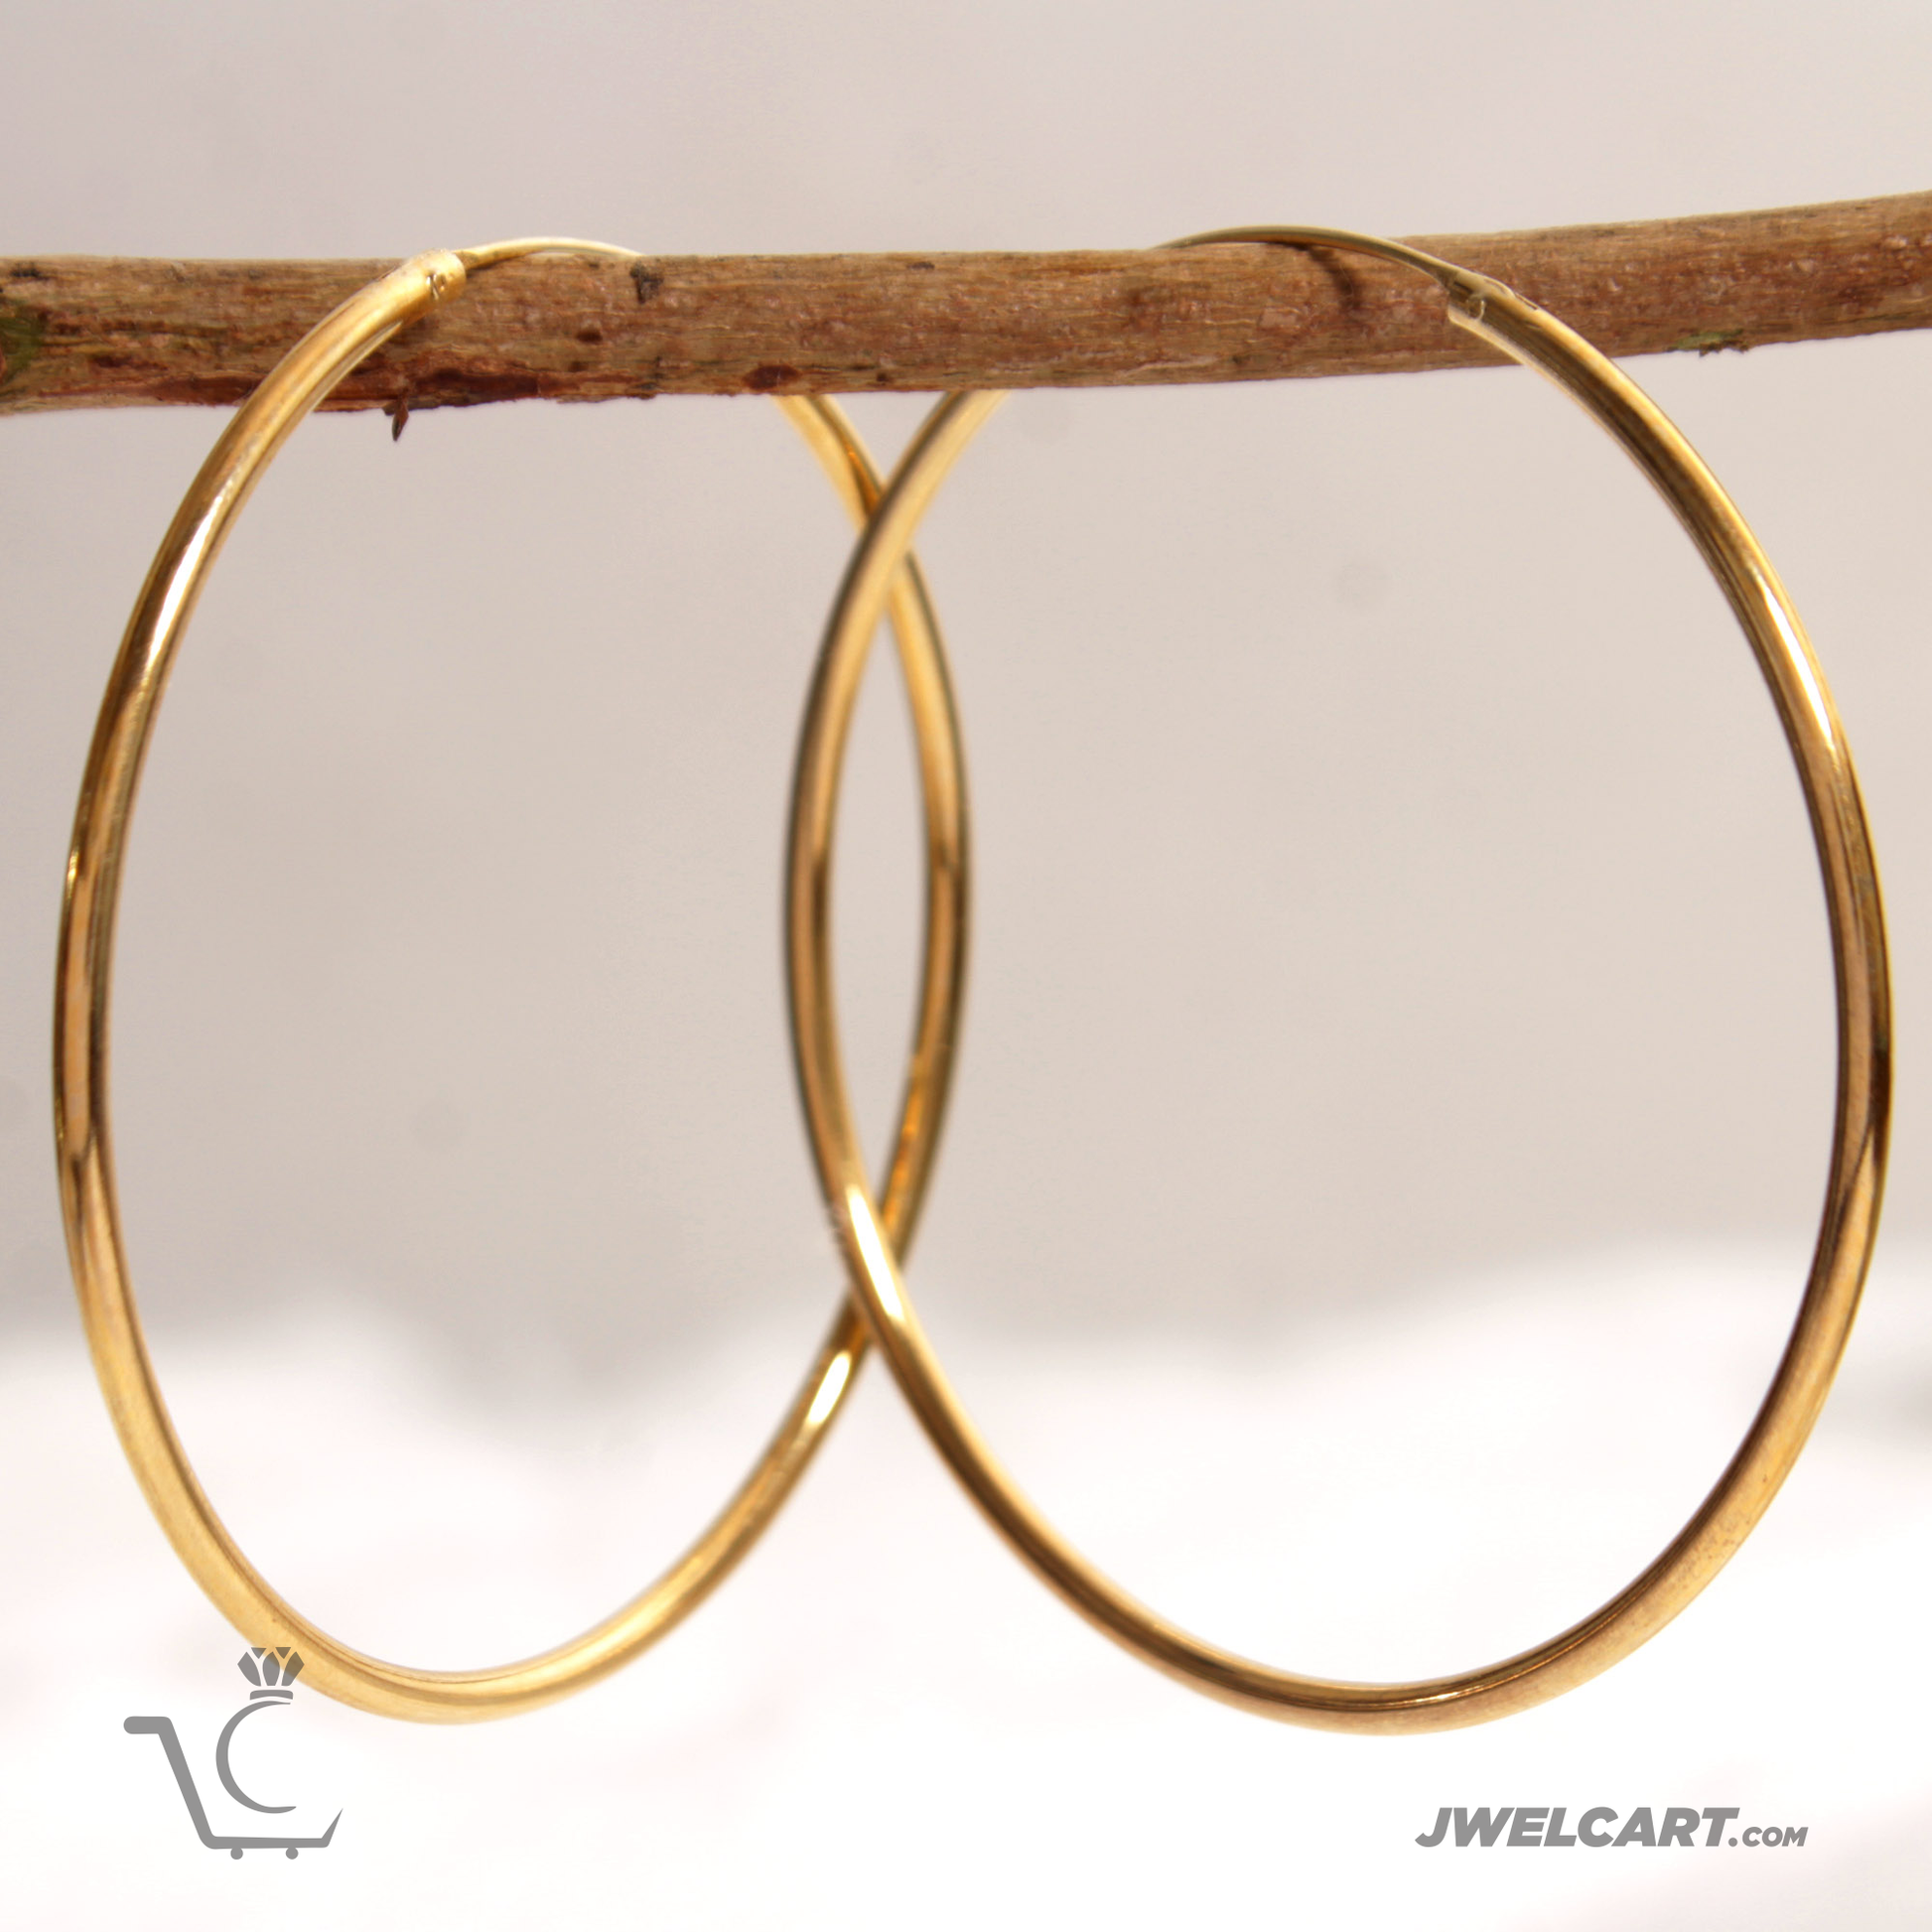 silver bangle earrings with 18k gold plated